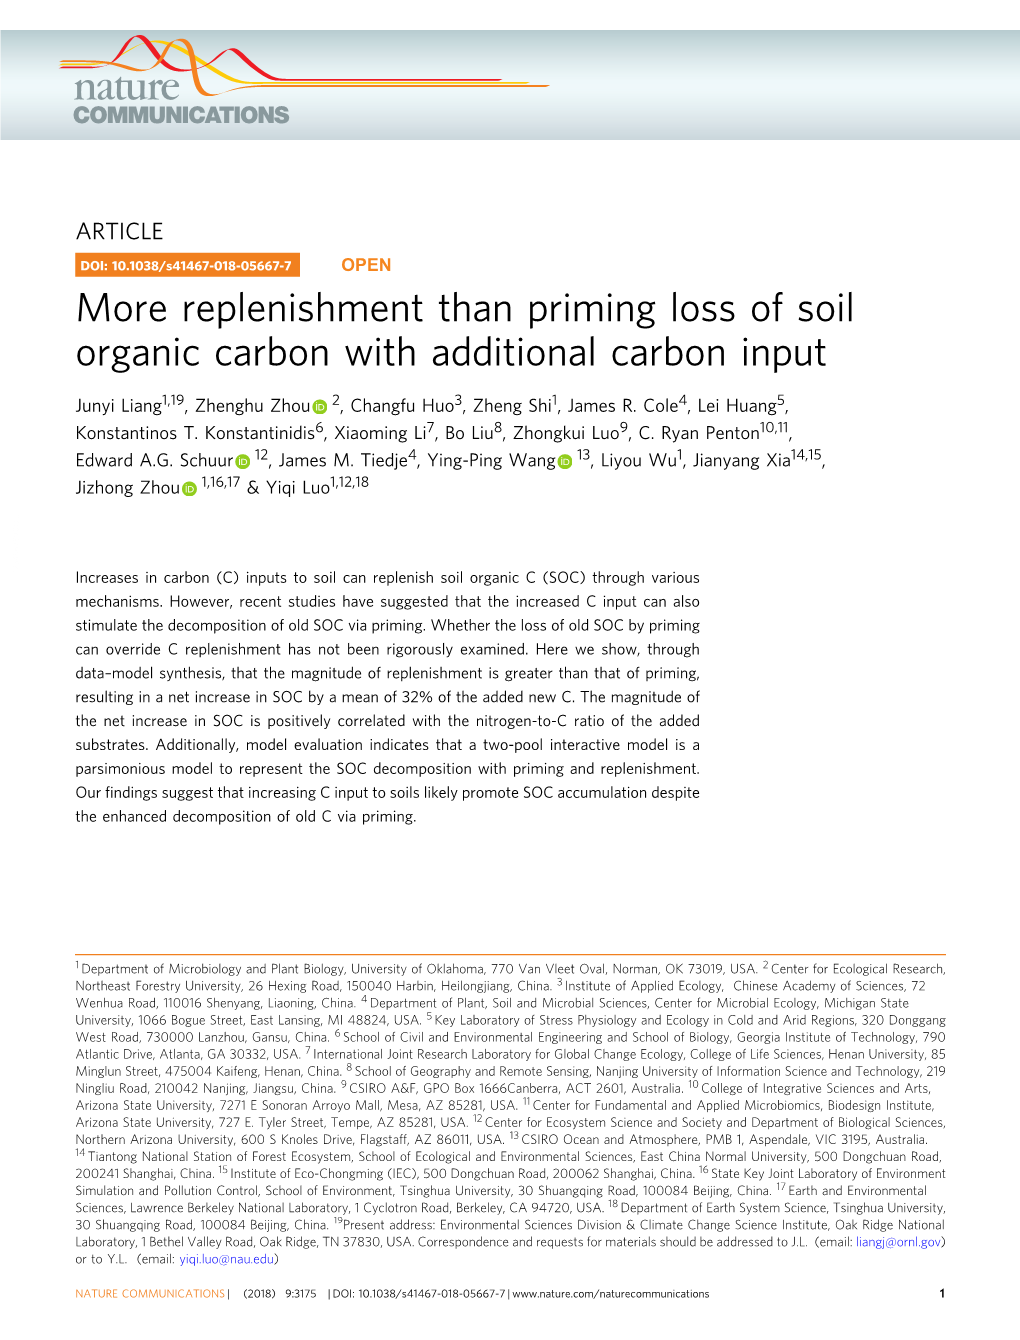 Replenishment Than Priming Loss of Soil Organic Carbon with Additional Carbon Input